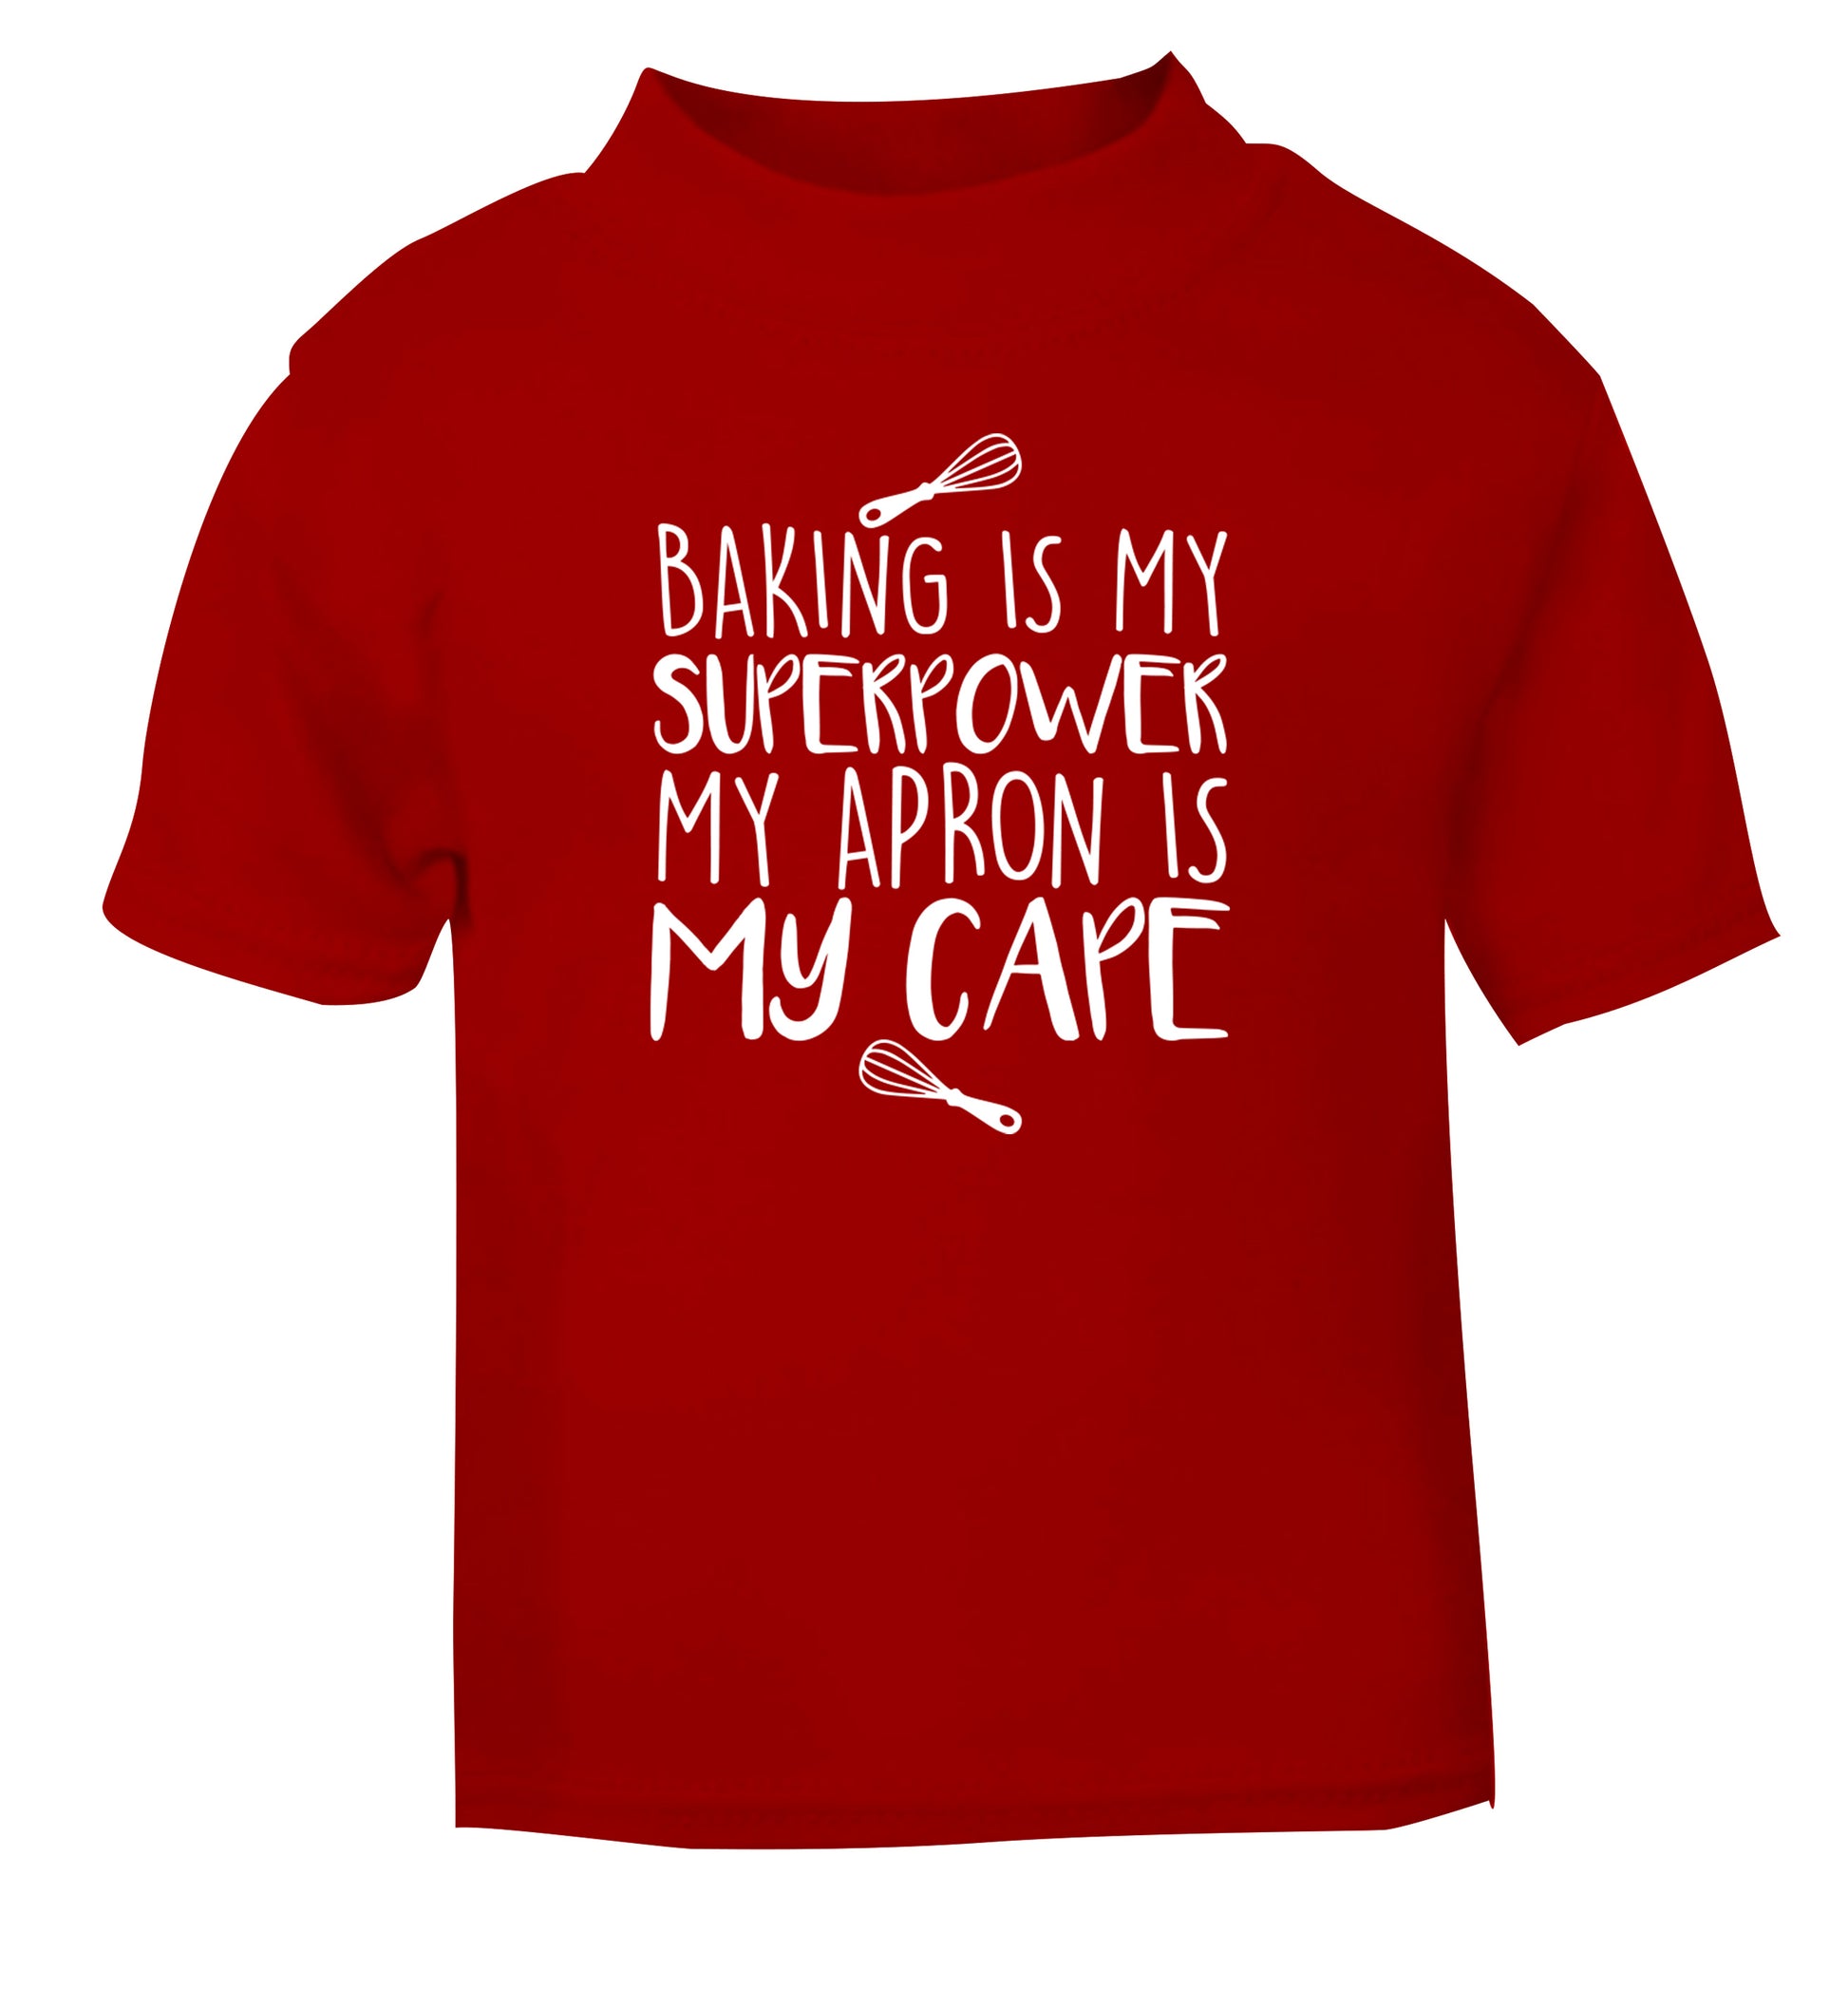 Baking is my superpower my apron is my cape red Baby Toddler Tshirt 2 Years